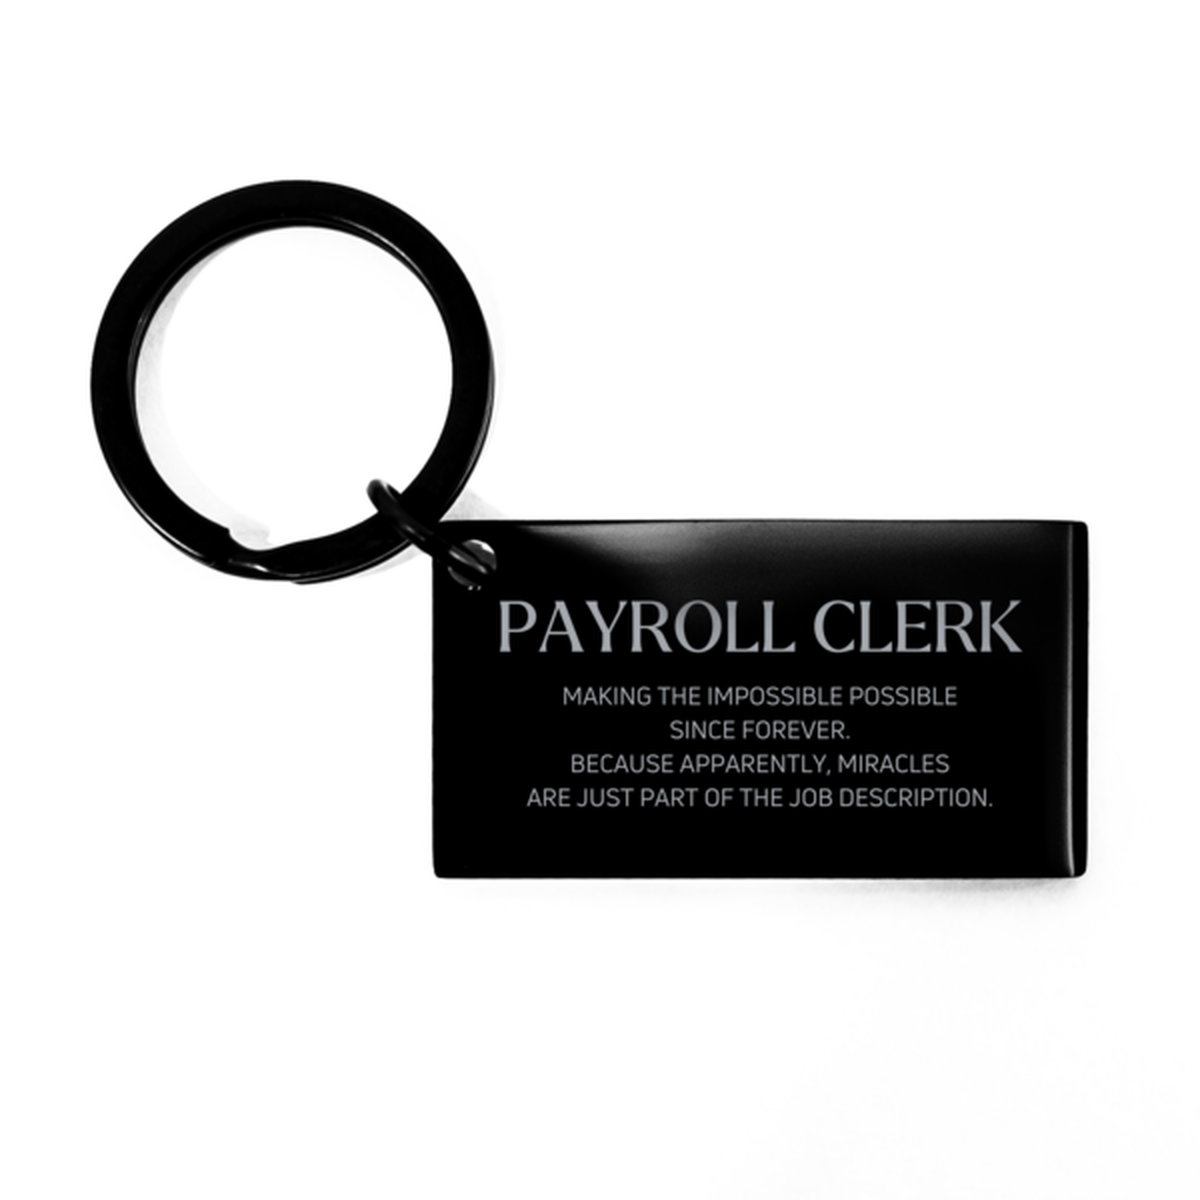 Funny Payroll Clerk Gifts, Miracles are just part of the job description, Inspirational Birthday Keychain For Payroll Clerk, Men, Women, Coworkers, Friends, Boss